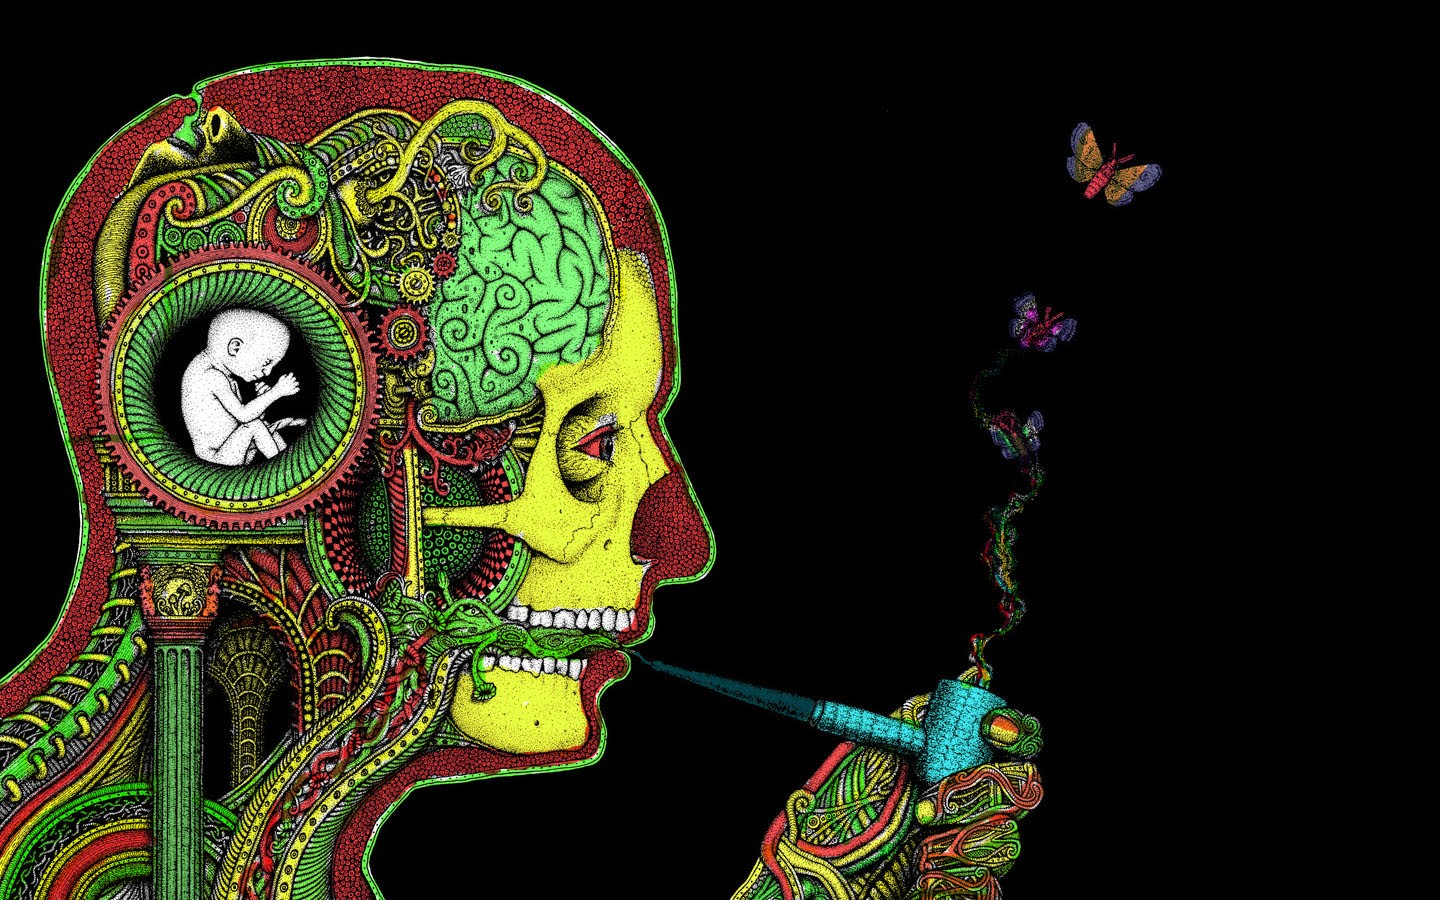 General 1440x900 pipes face butterfly brain Rastafari H. R. Giger artwork psychedelic skull surreal smoking